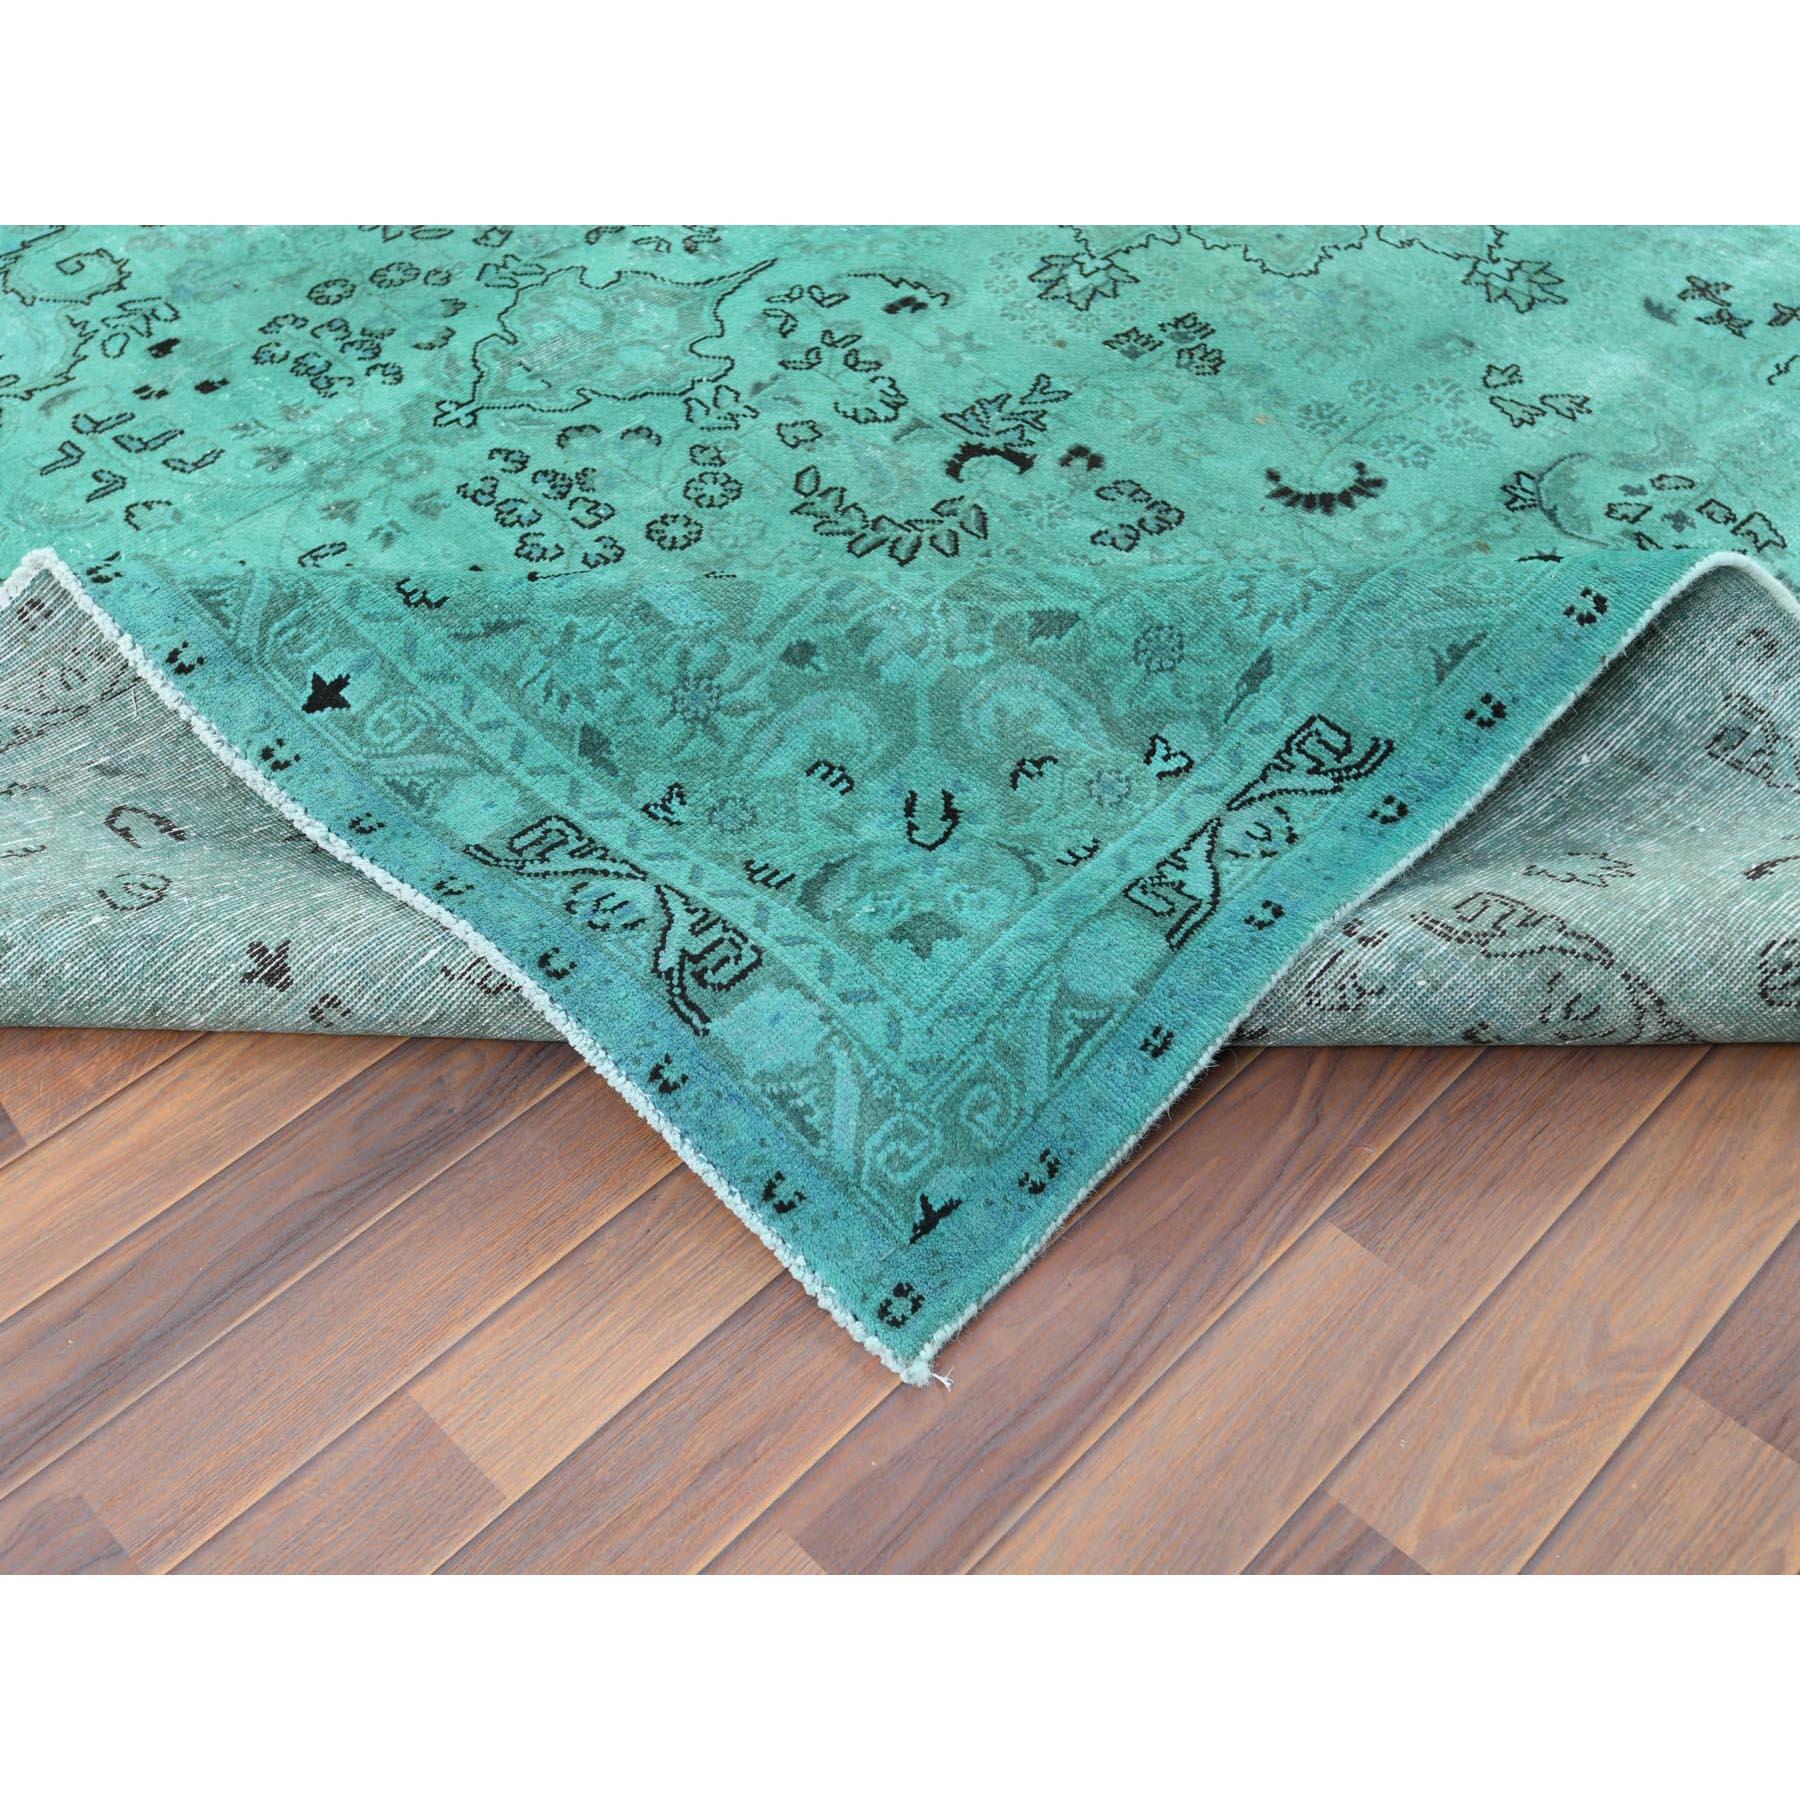 Hand Knotted Teal Green Vintage Overdyed Persian Tabriz Distressed Worn Wool Rug 2